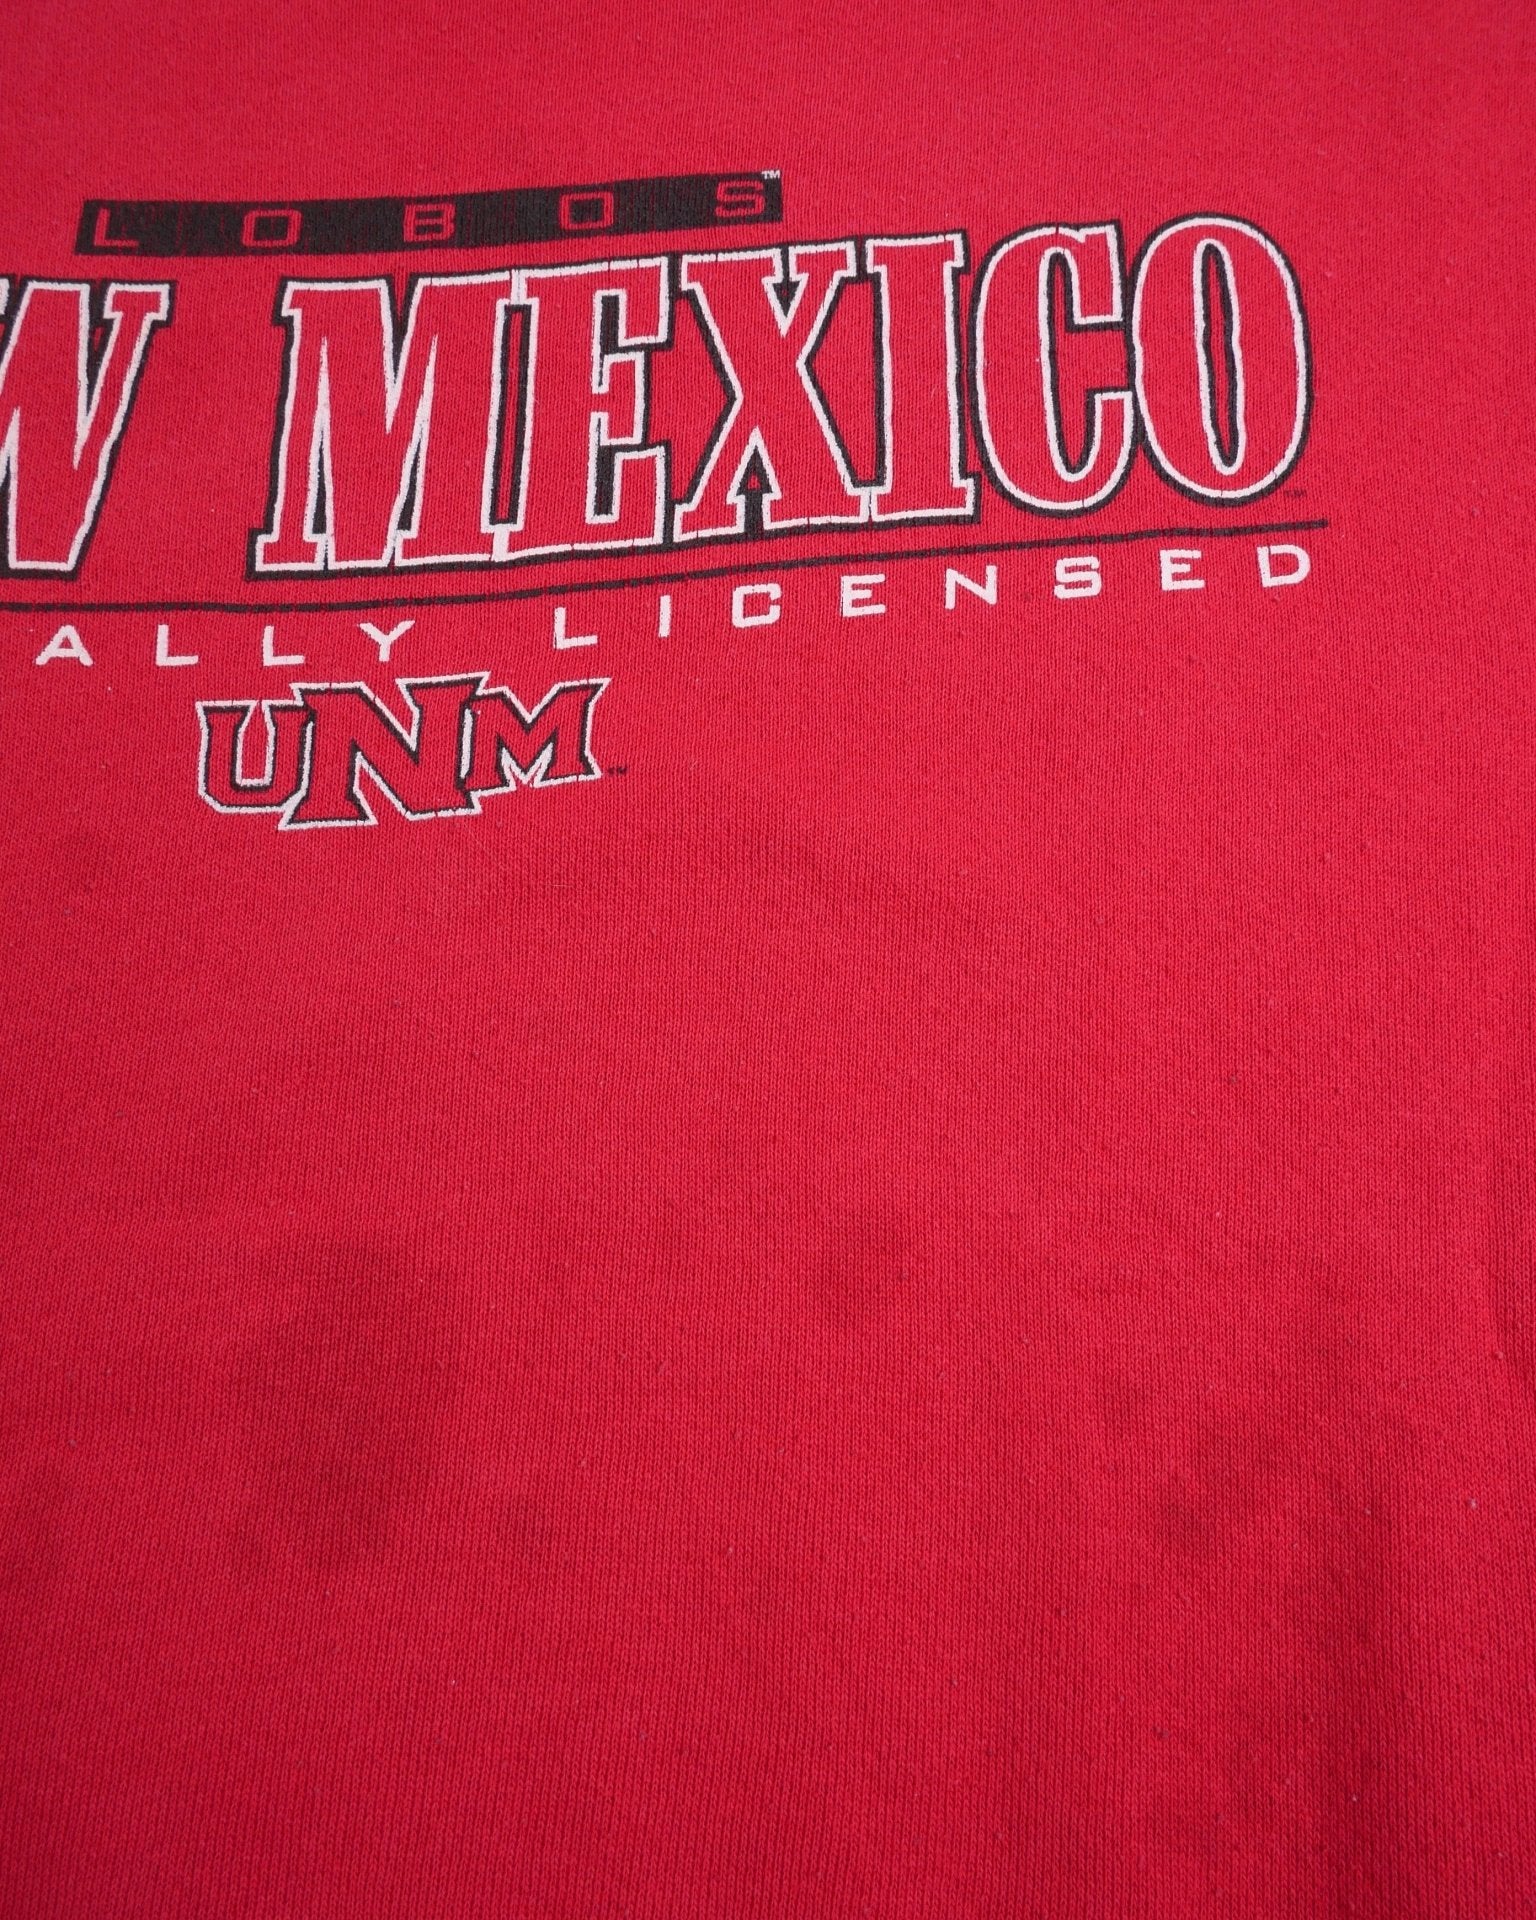 New Mexico printed Graphic red Sweater - Peeces